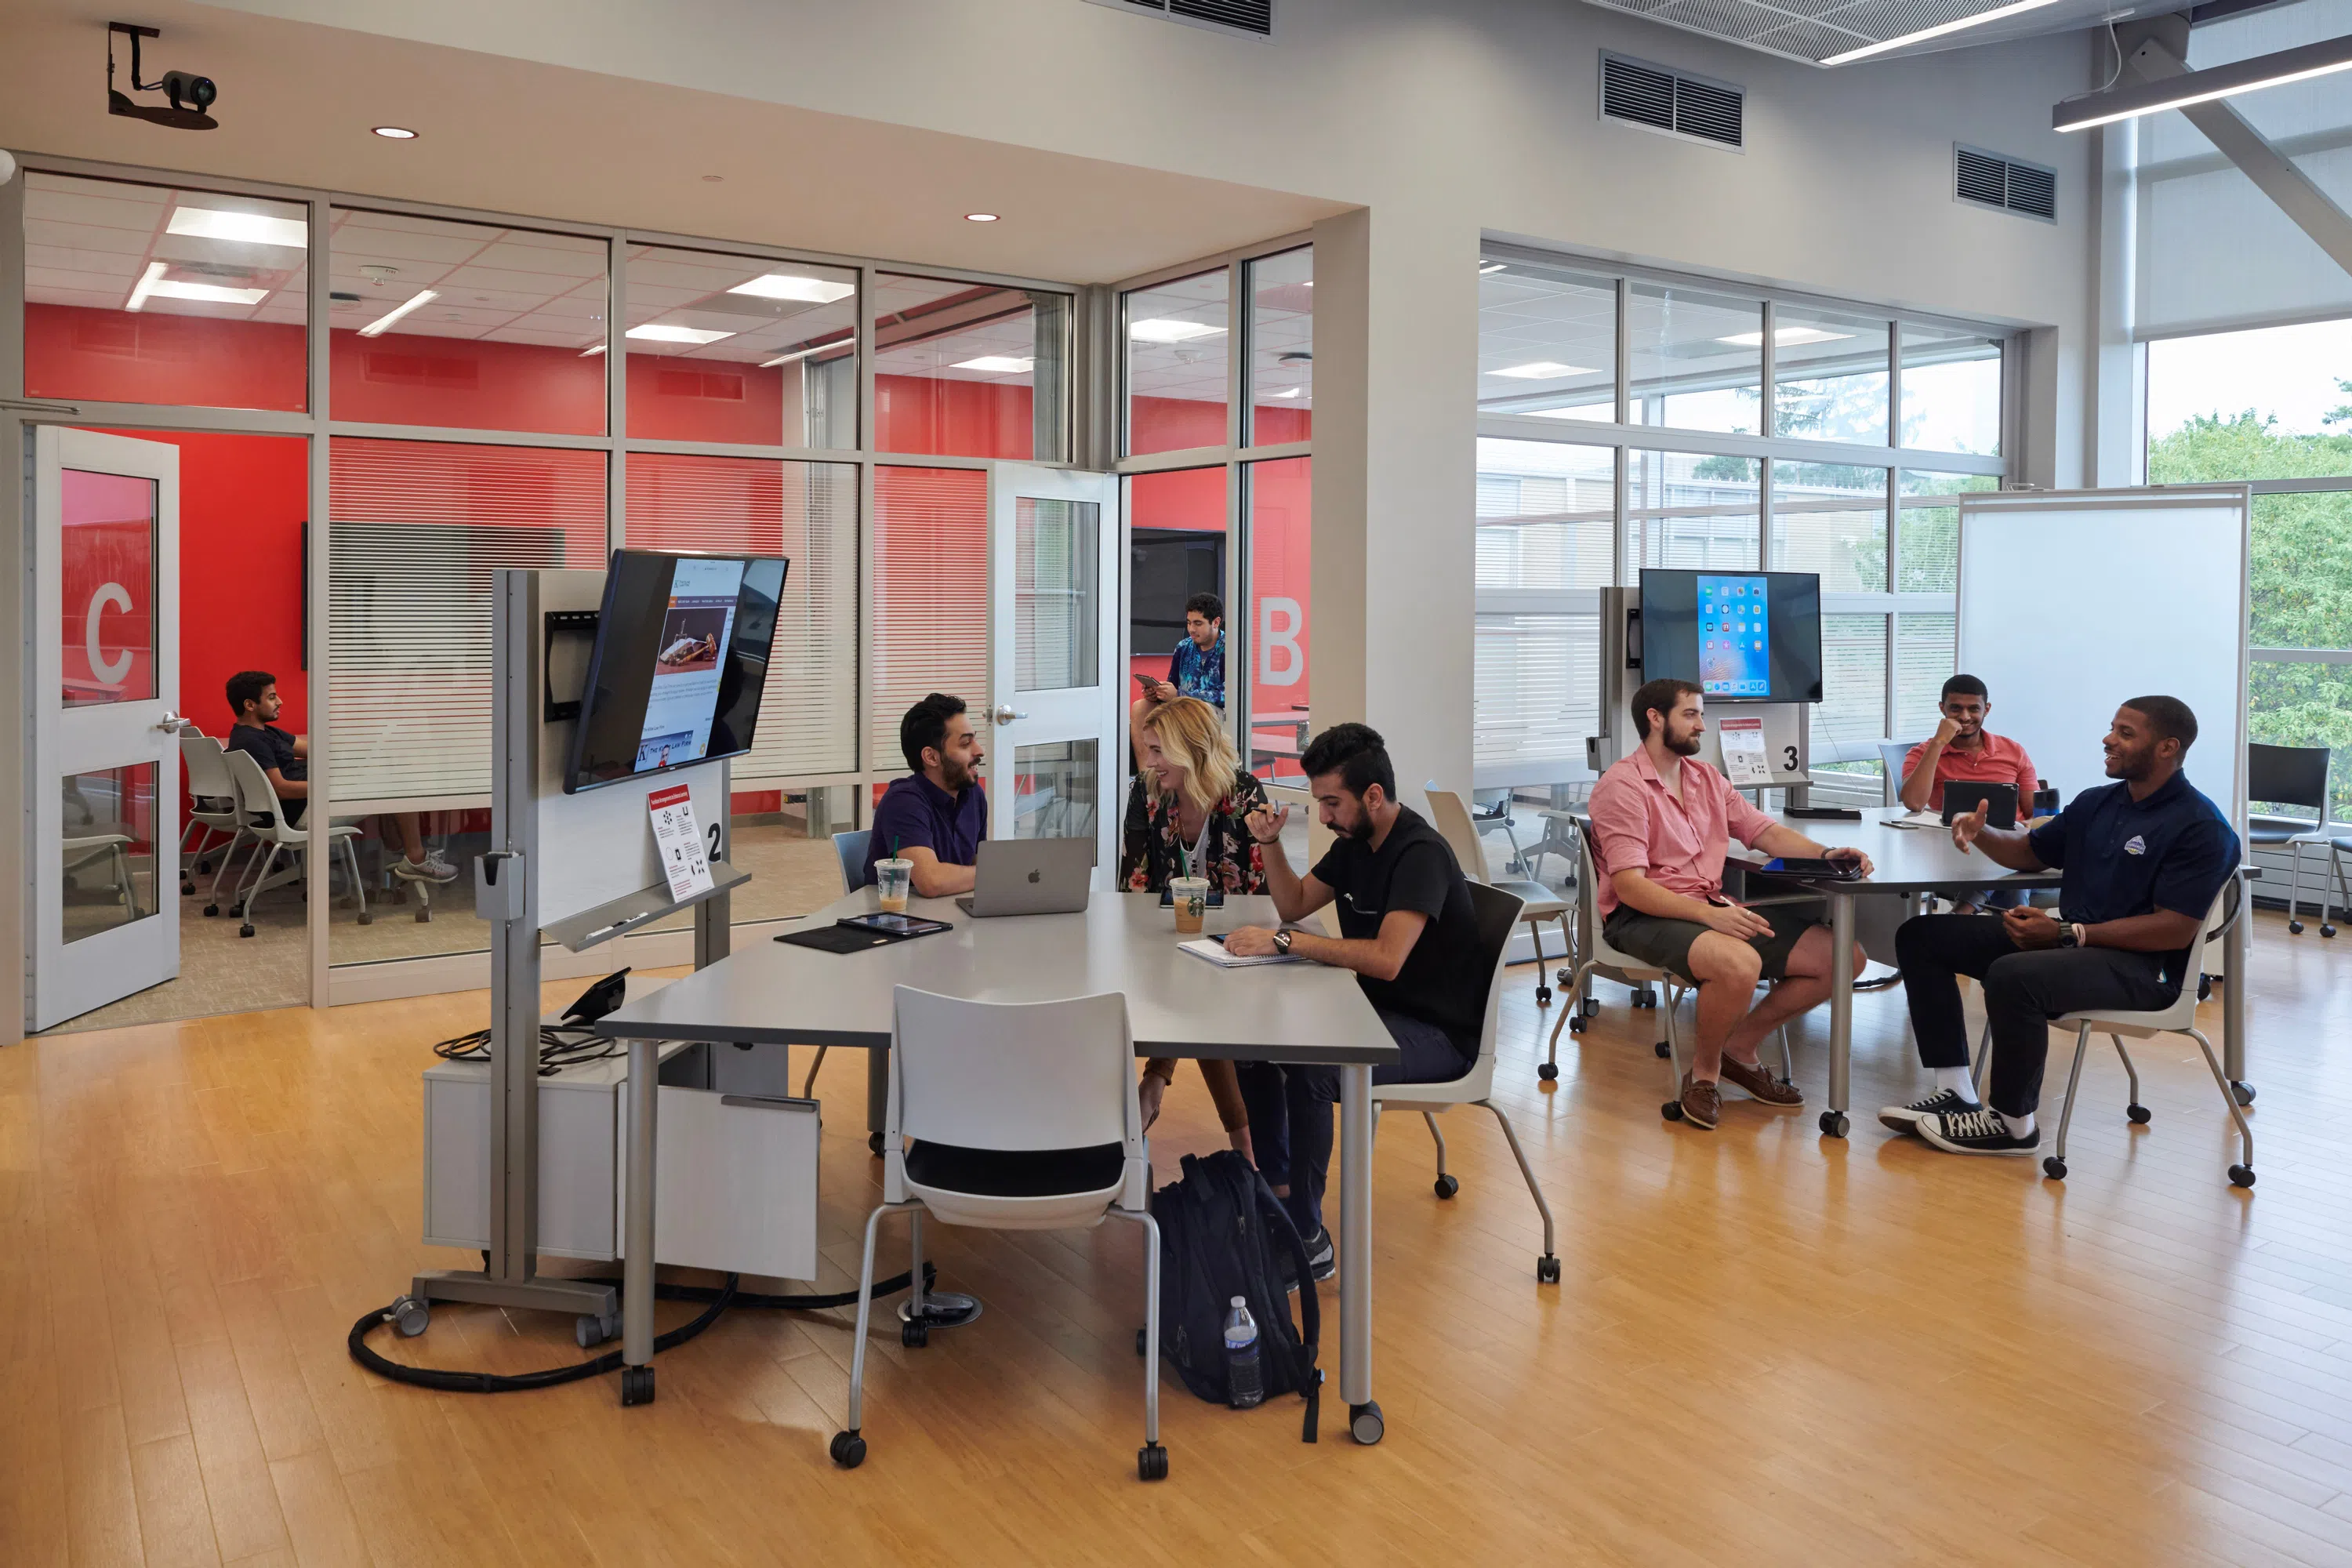 Our flexible learning space in Anheuser-Busch Hall (ABH). This classroom allows faculty and students to shift the room to create a new learning space based on the day's activities. 